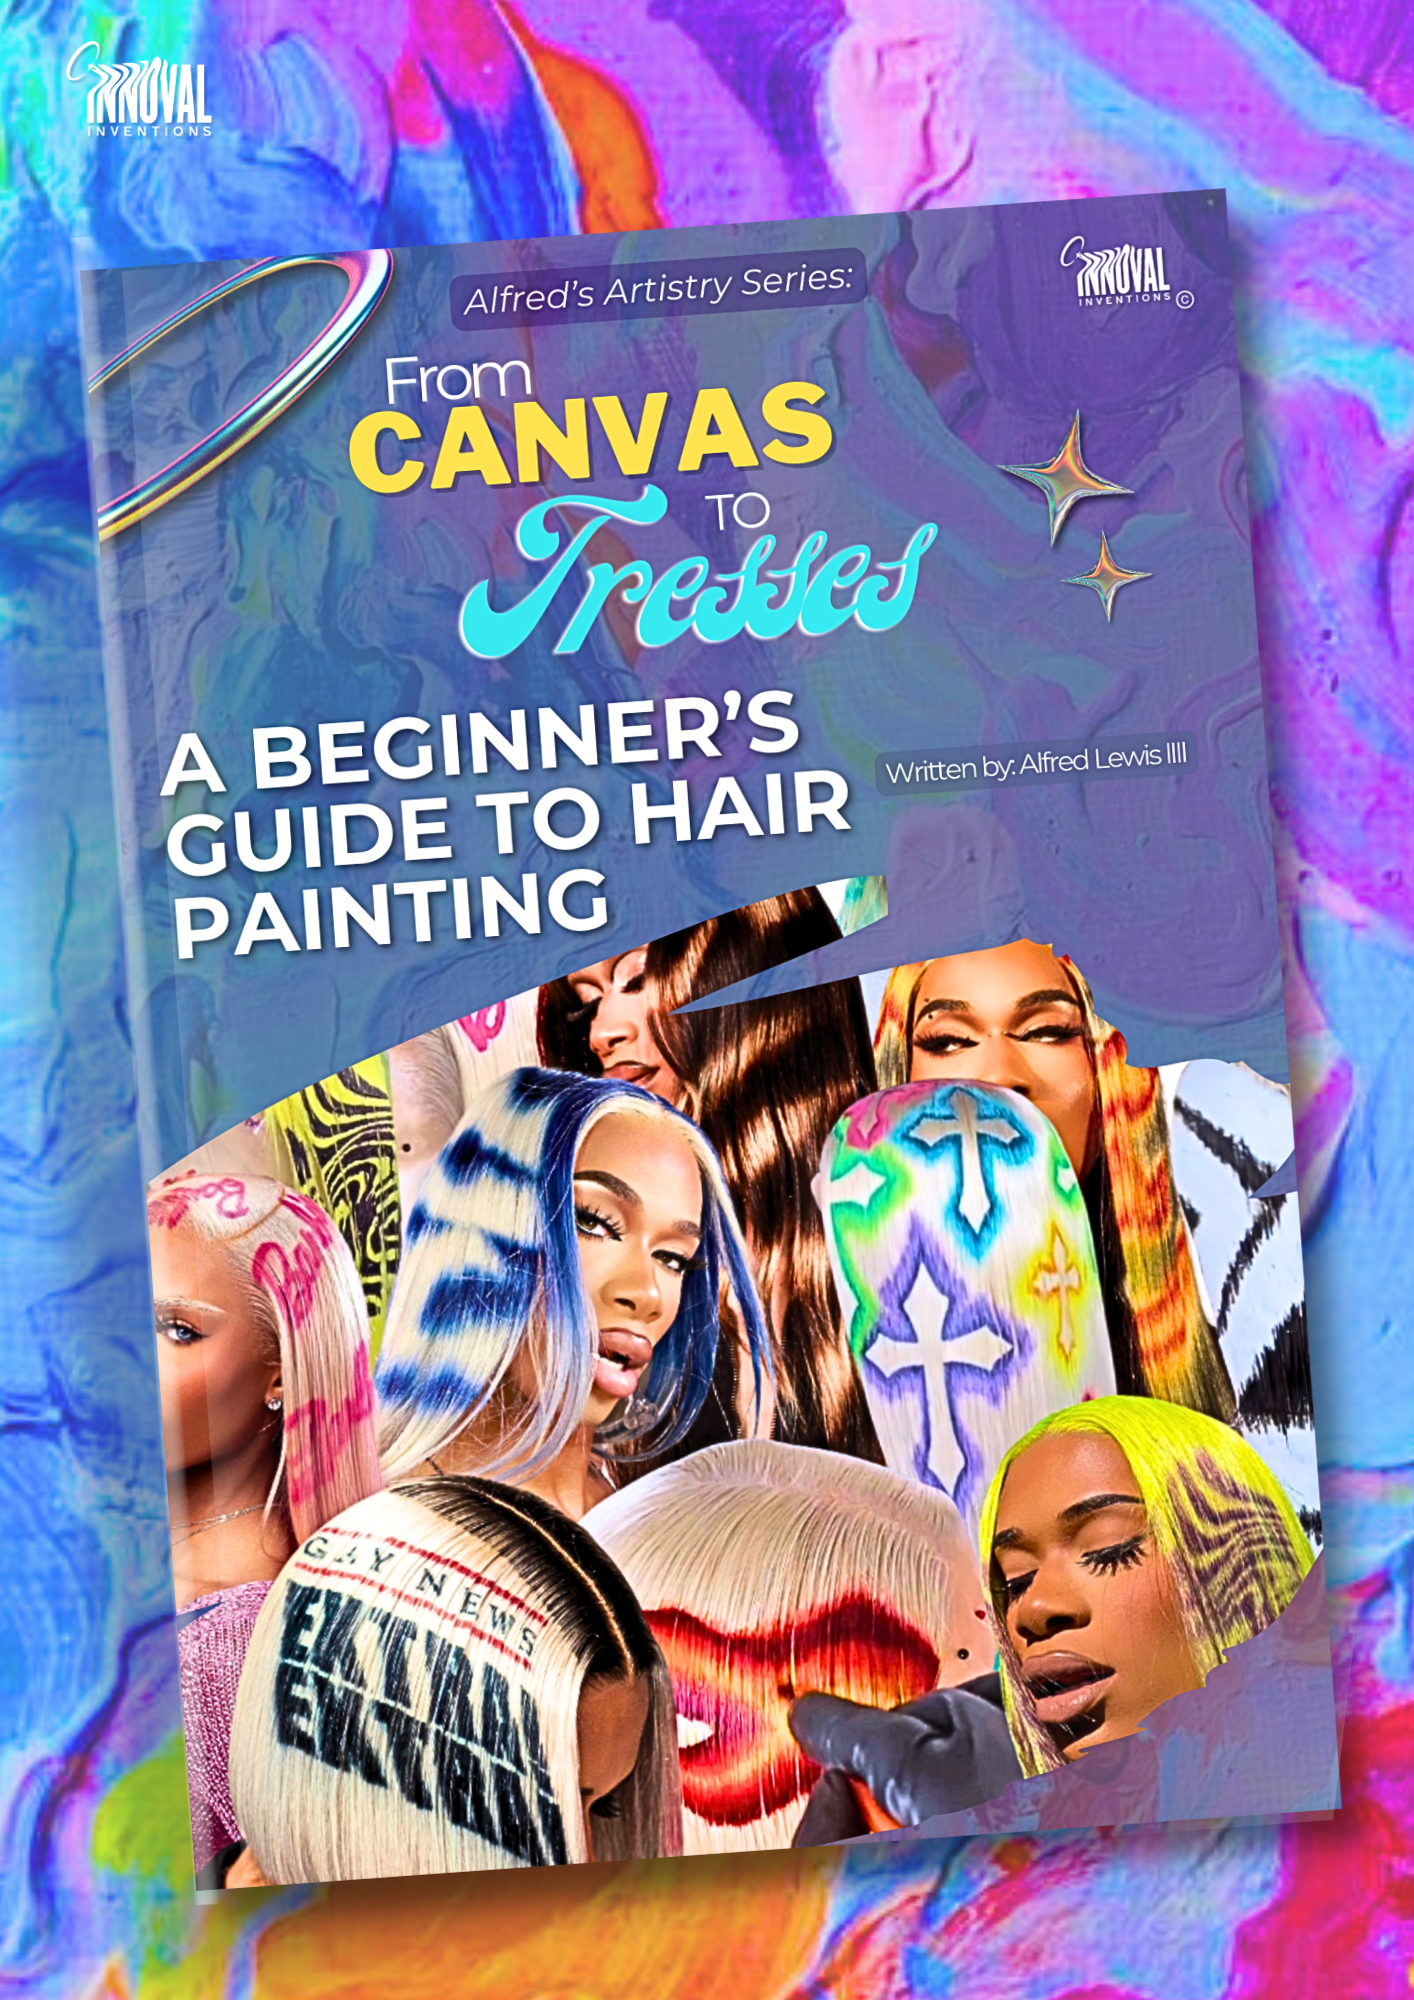 From Canvas To Tresses: A Beginners Guide to HAIR PAINTING